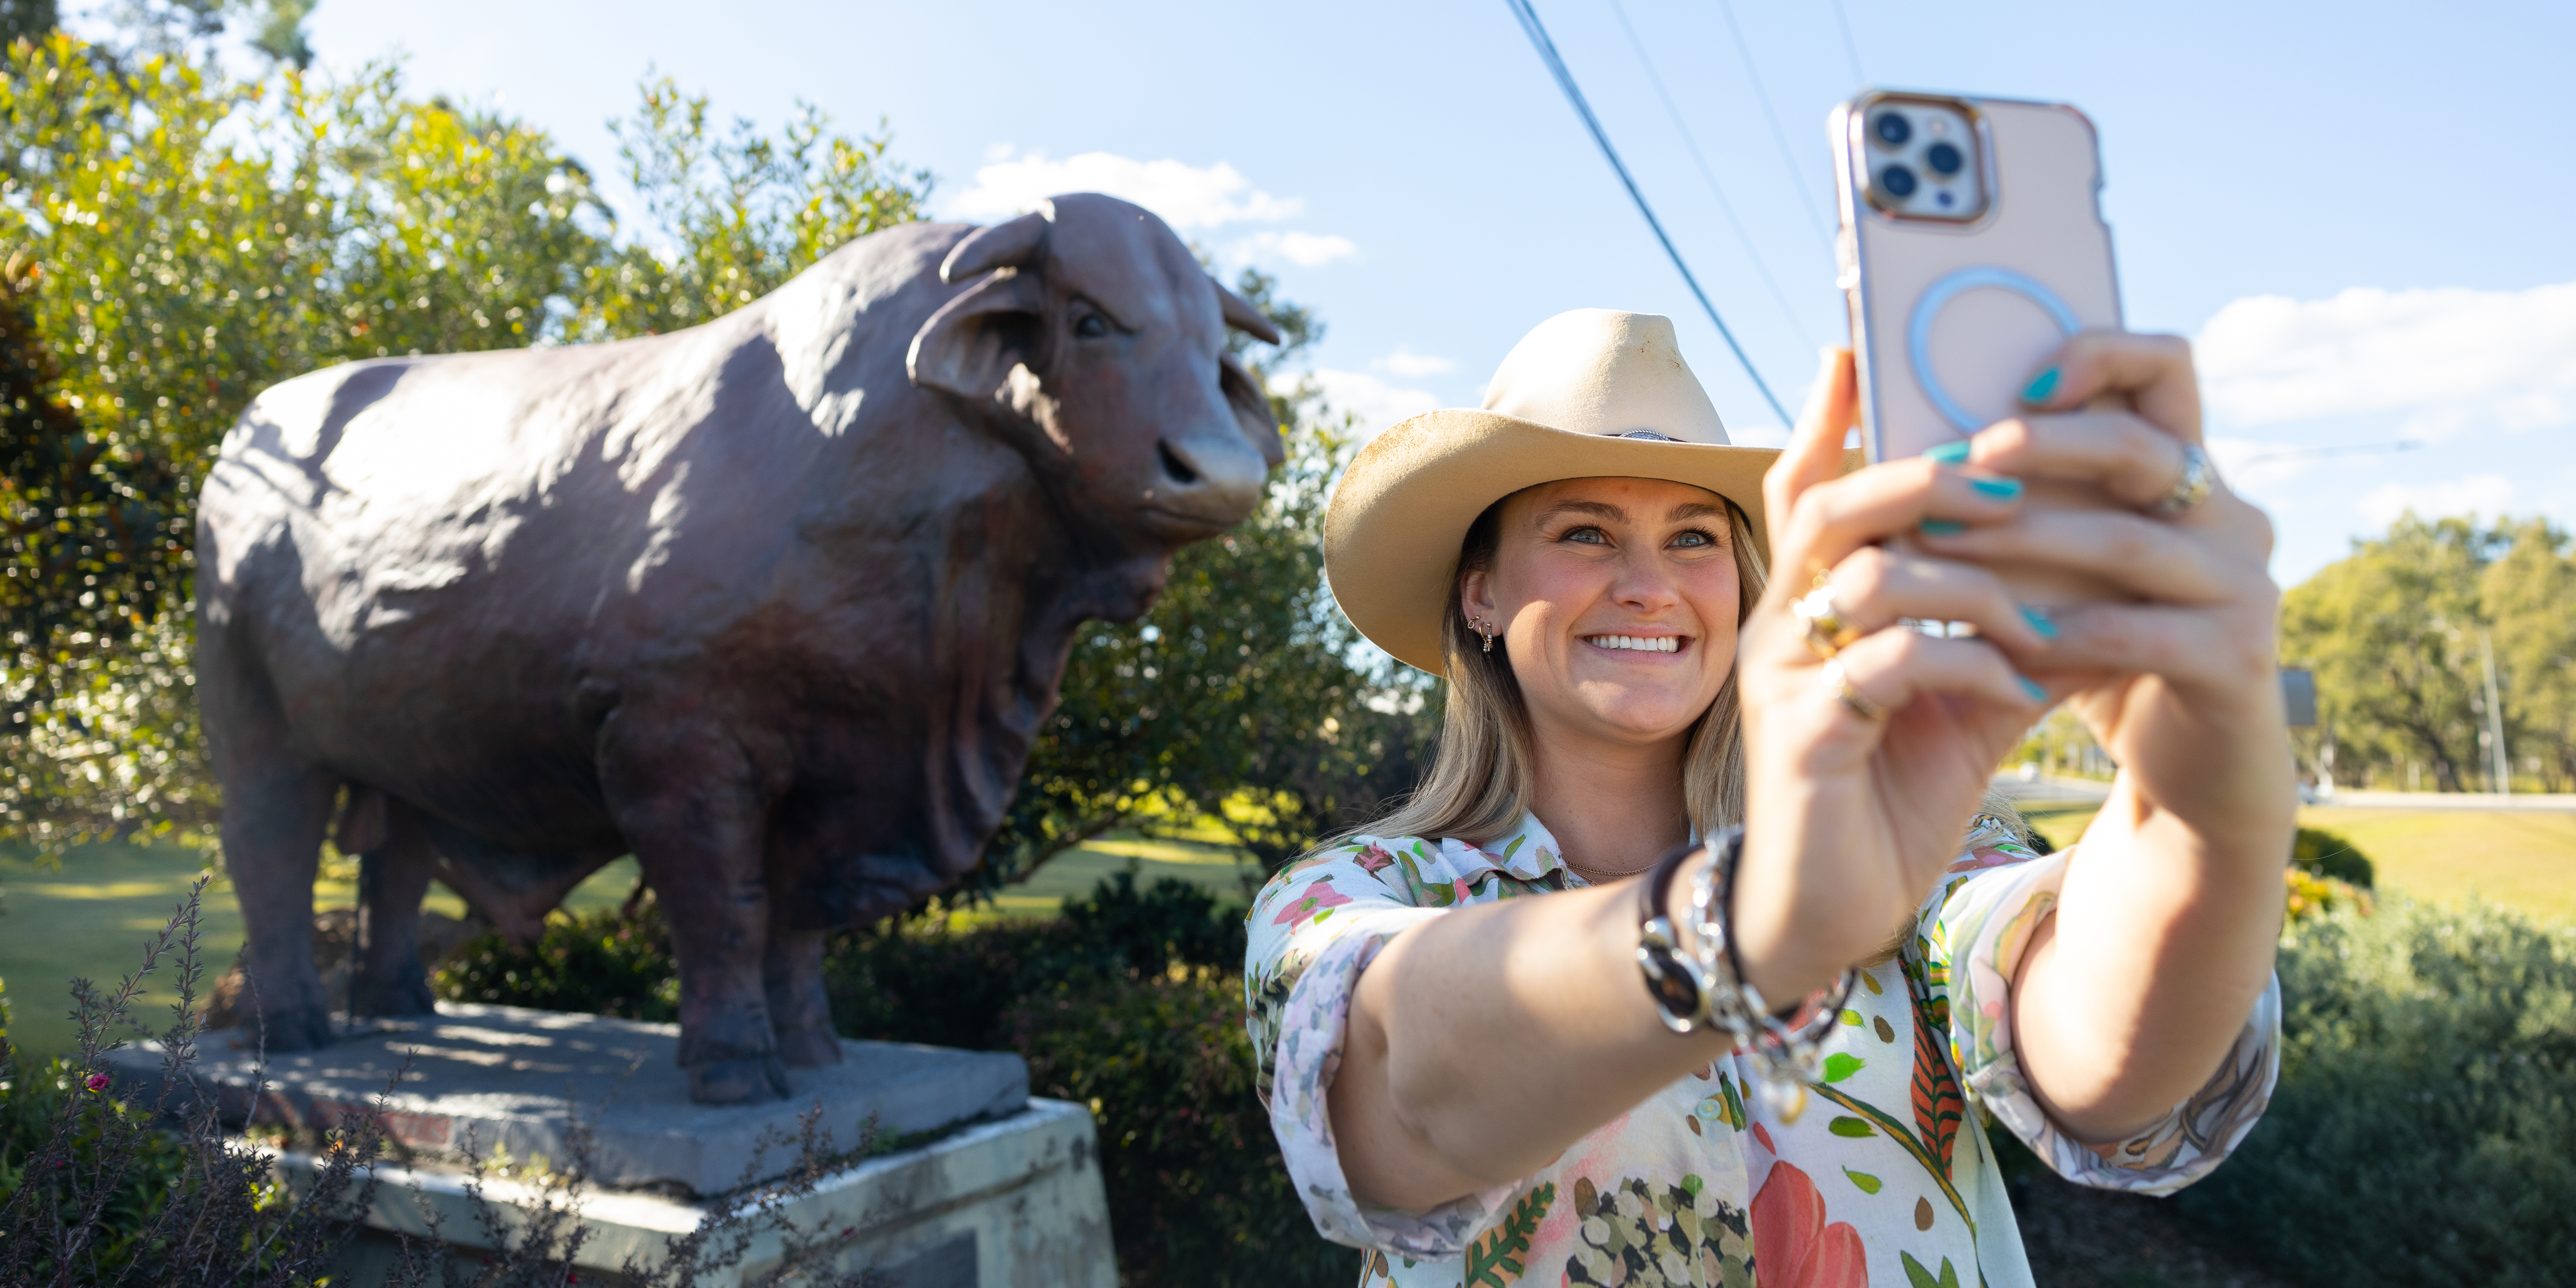 Young woman taking selfie with a Bull statue